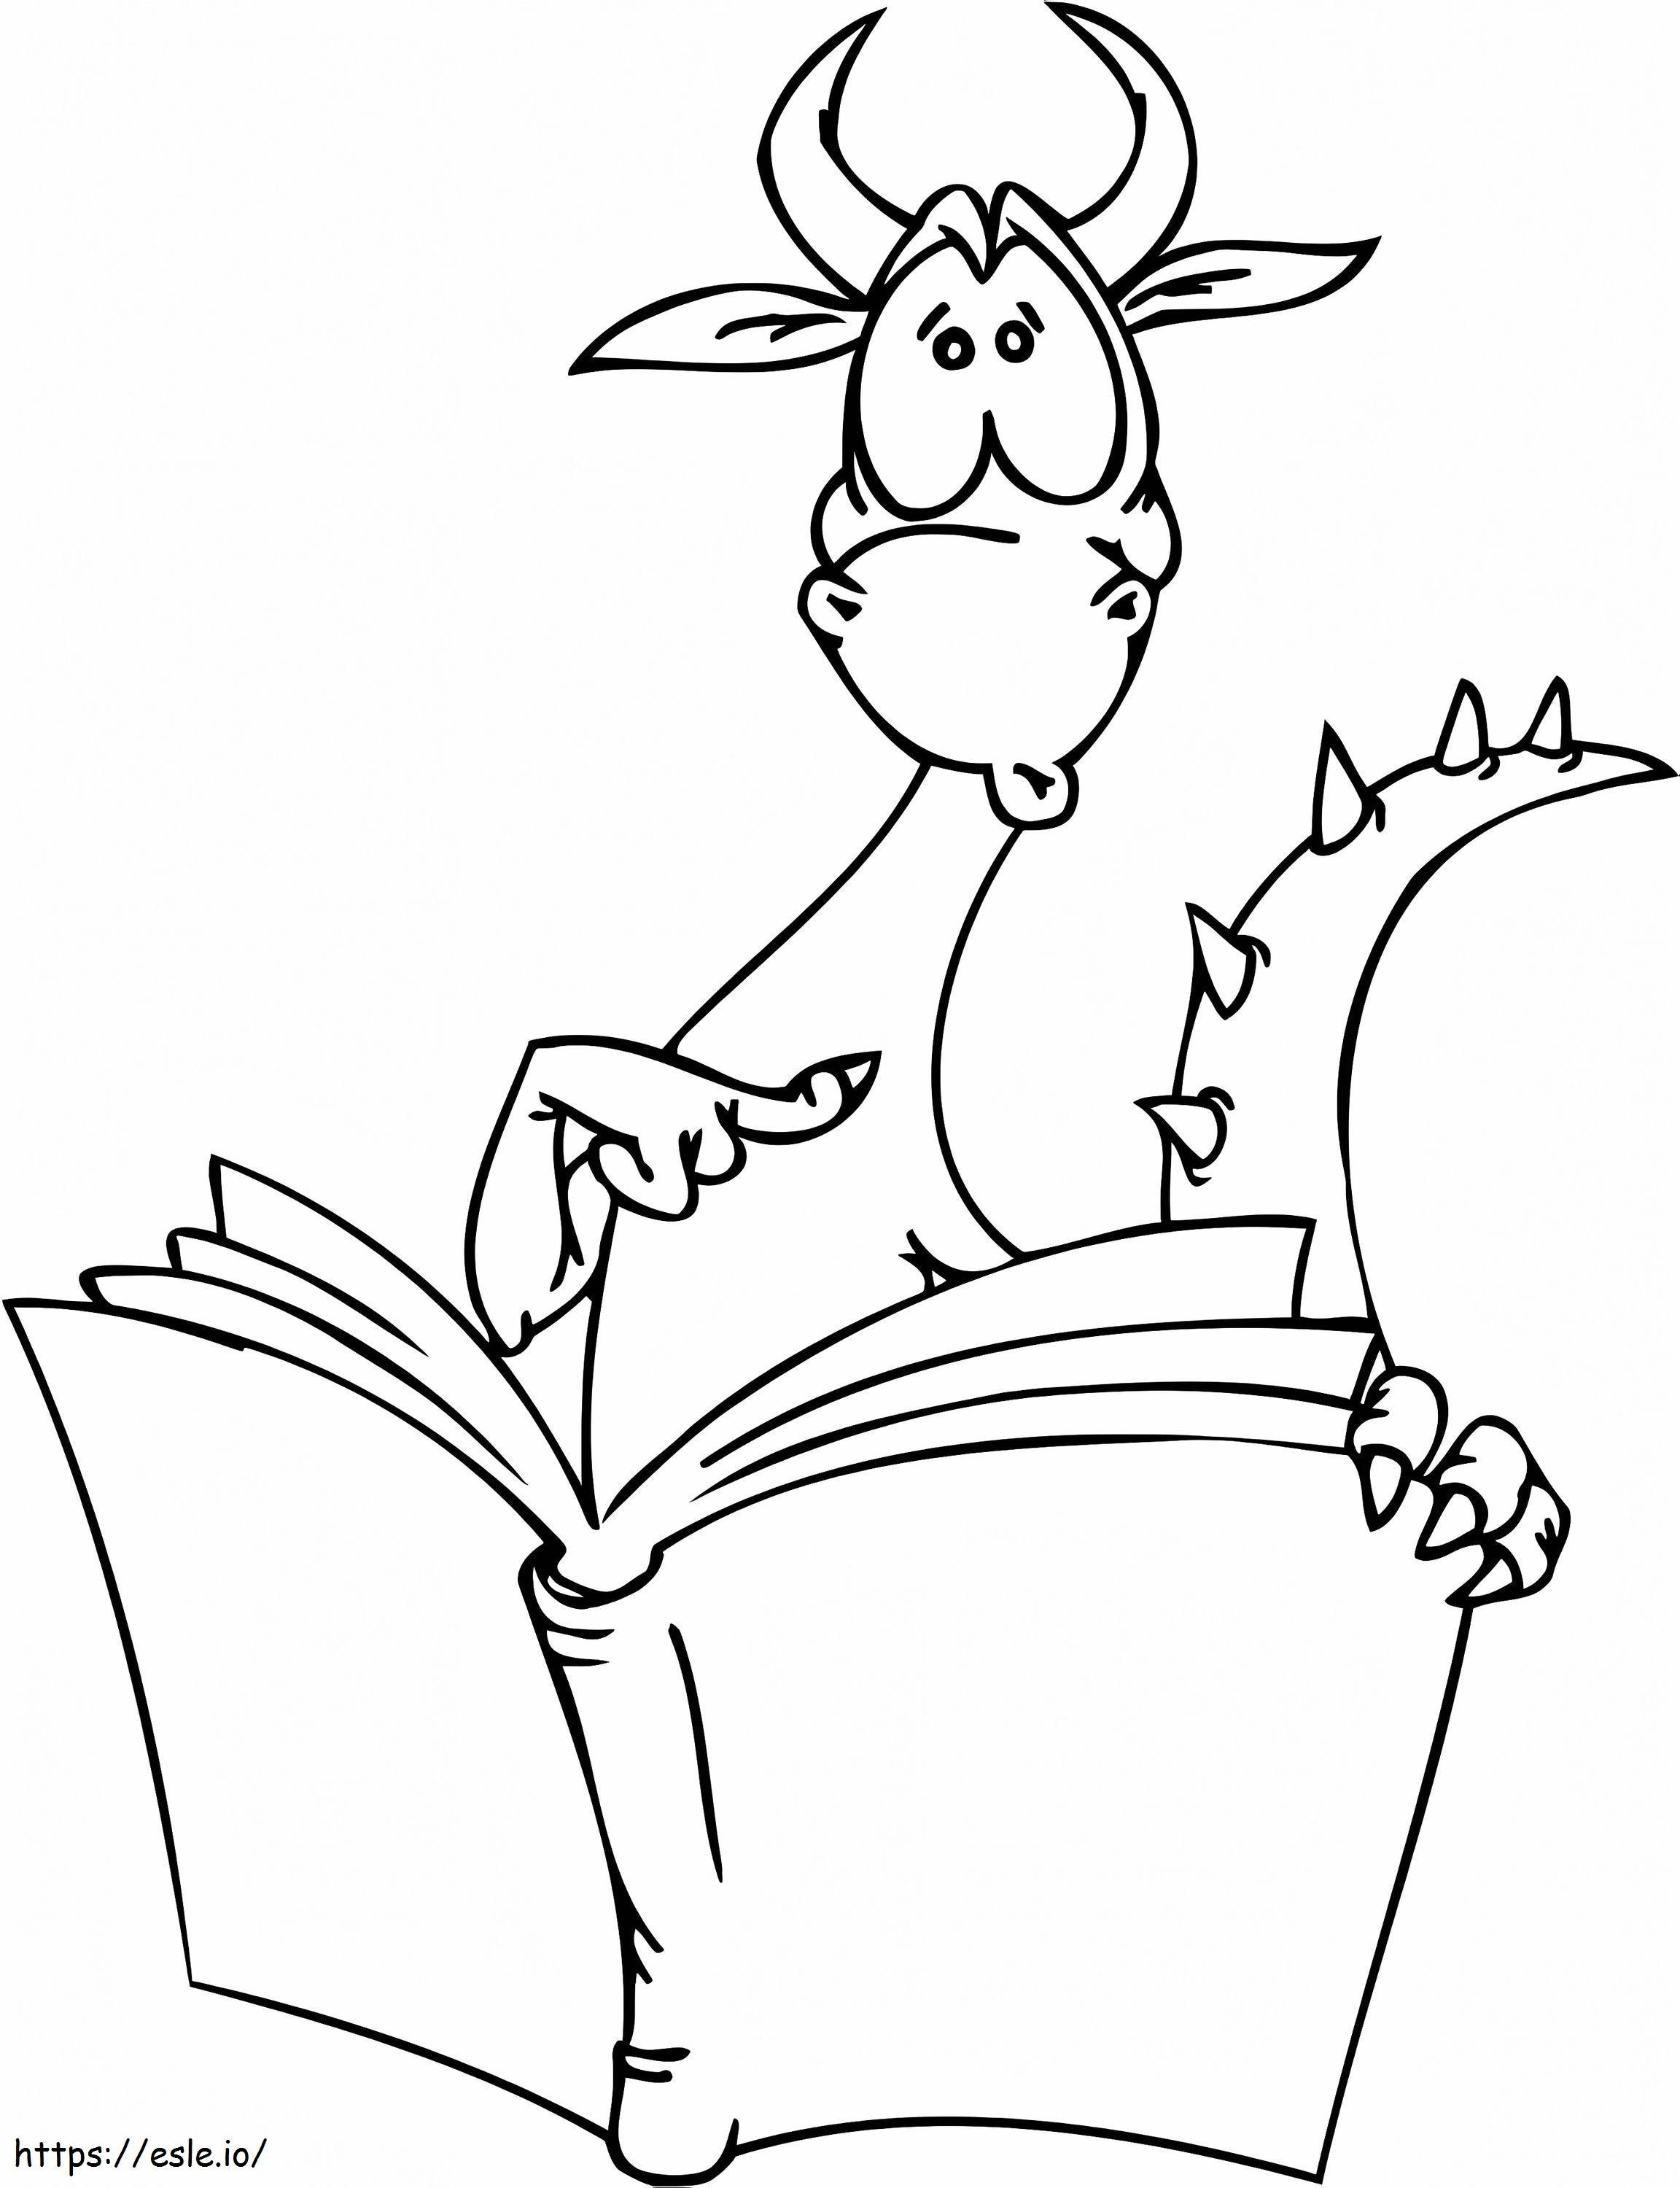 Dragon With Book coloring page